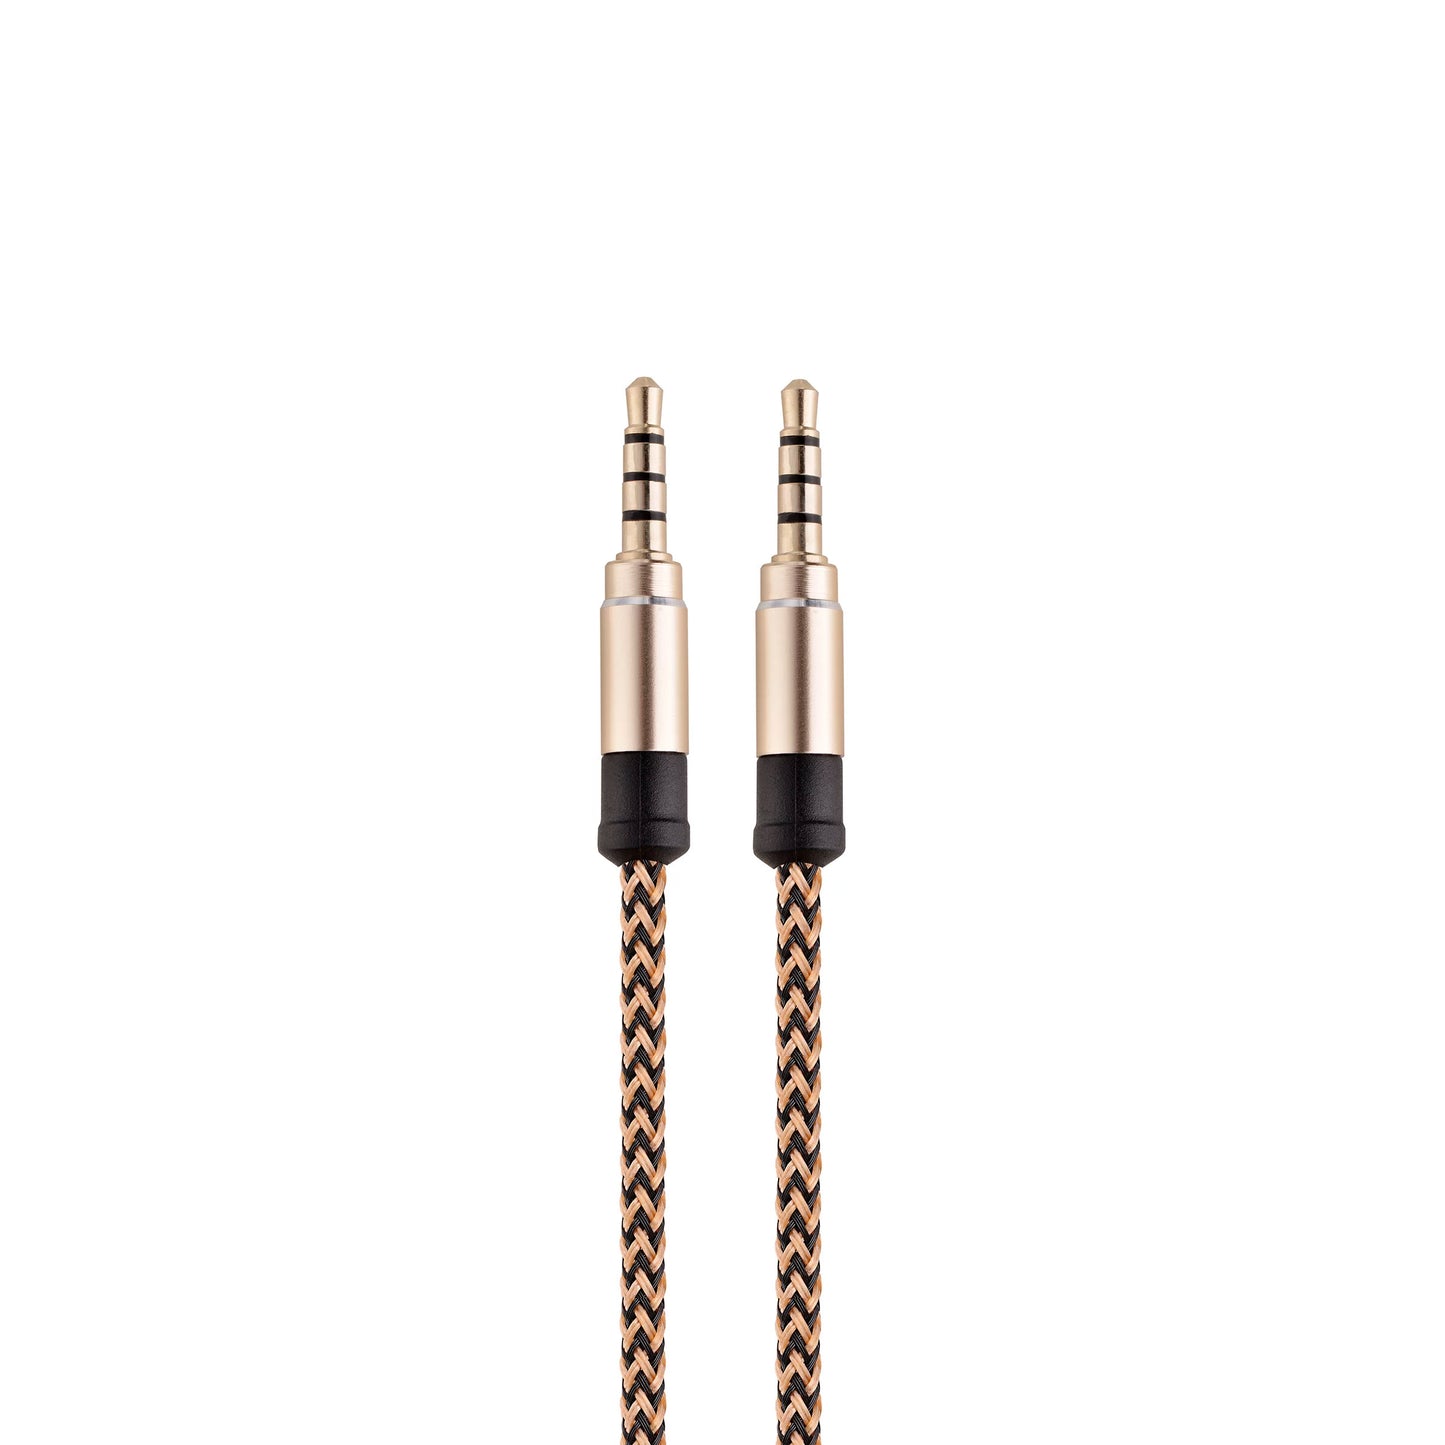 Motto Braided Audio Cable 3FT